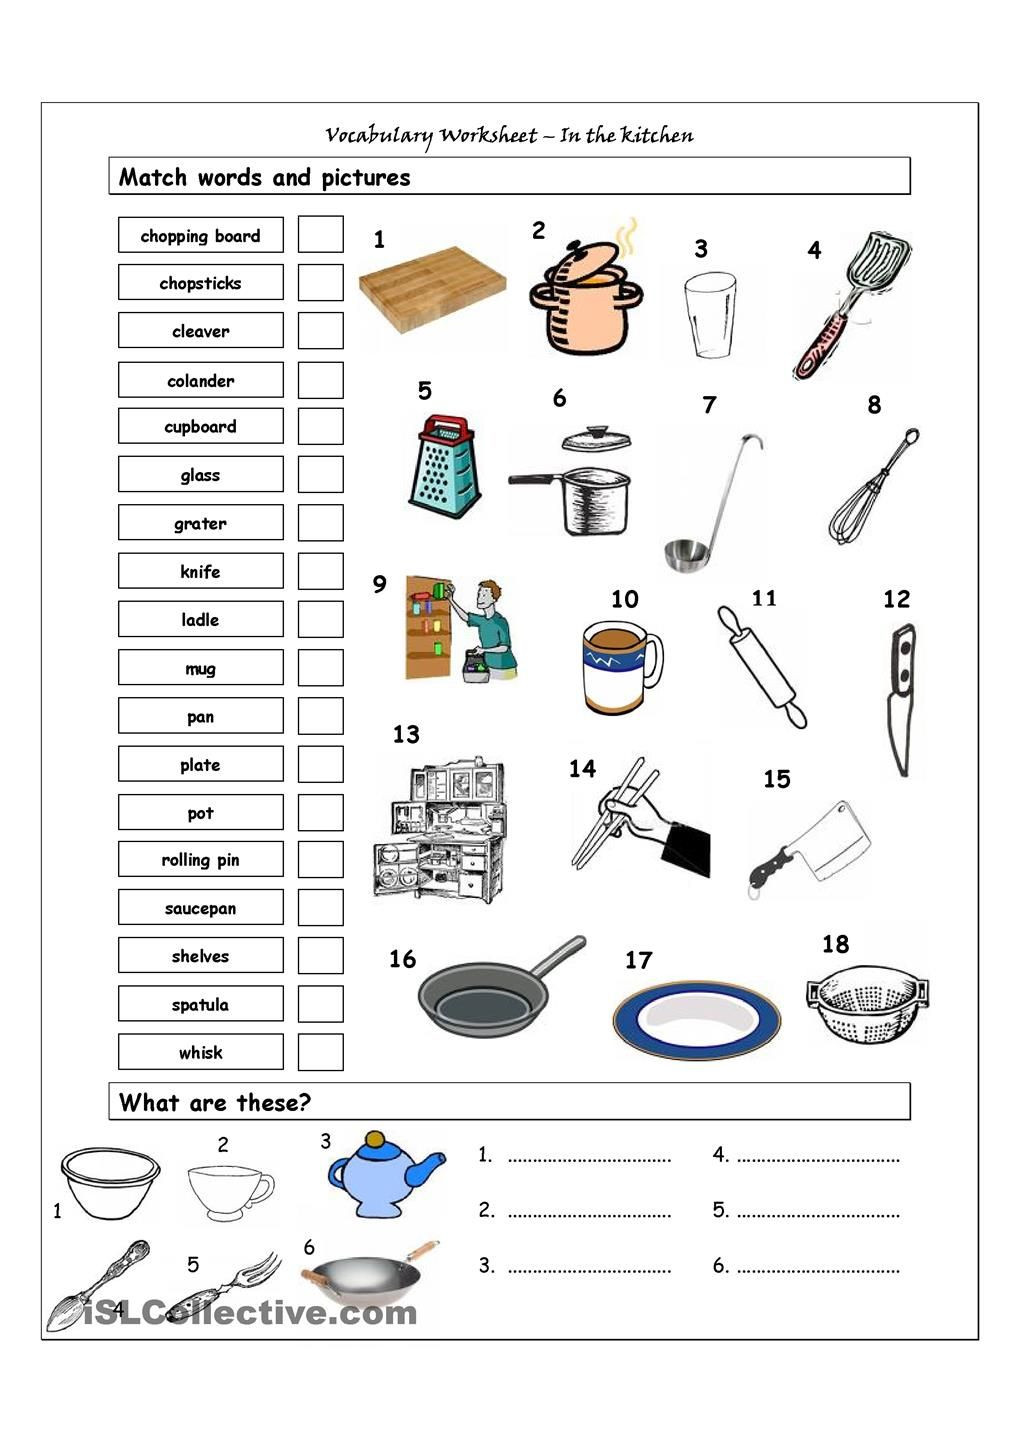 Basic Cooking Terms Worksheet Answers Vocabulary Matching Worksheet In the Kitchen